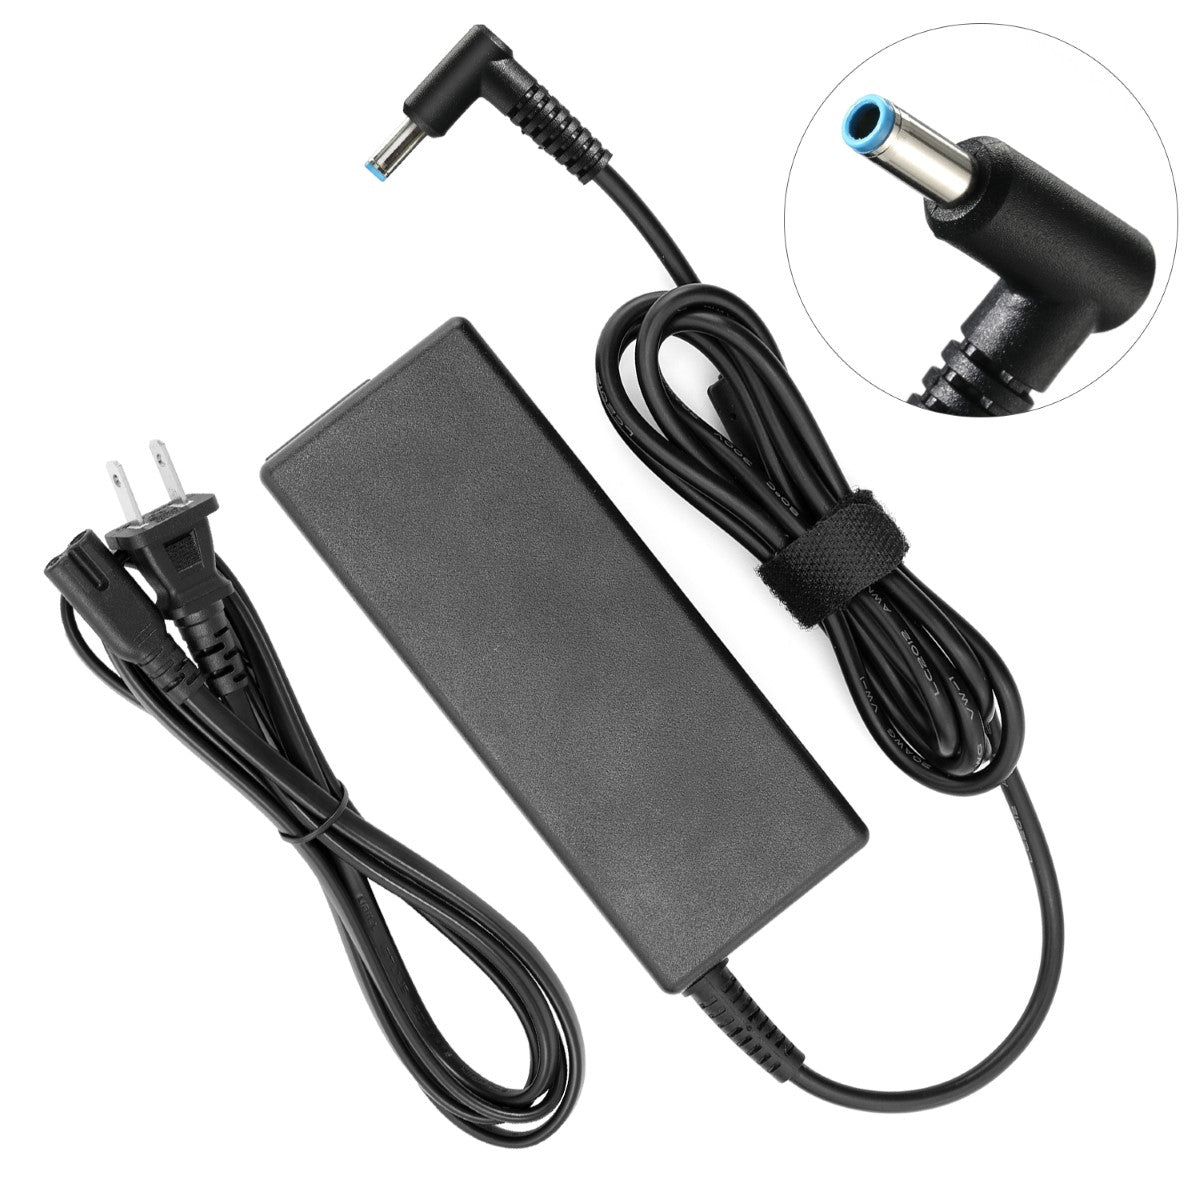 AC Adapter Charger for HP Envy Touchsmart 17-j170ca Notebook.